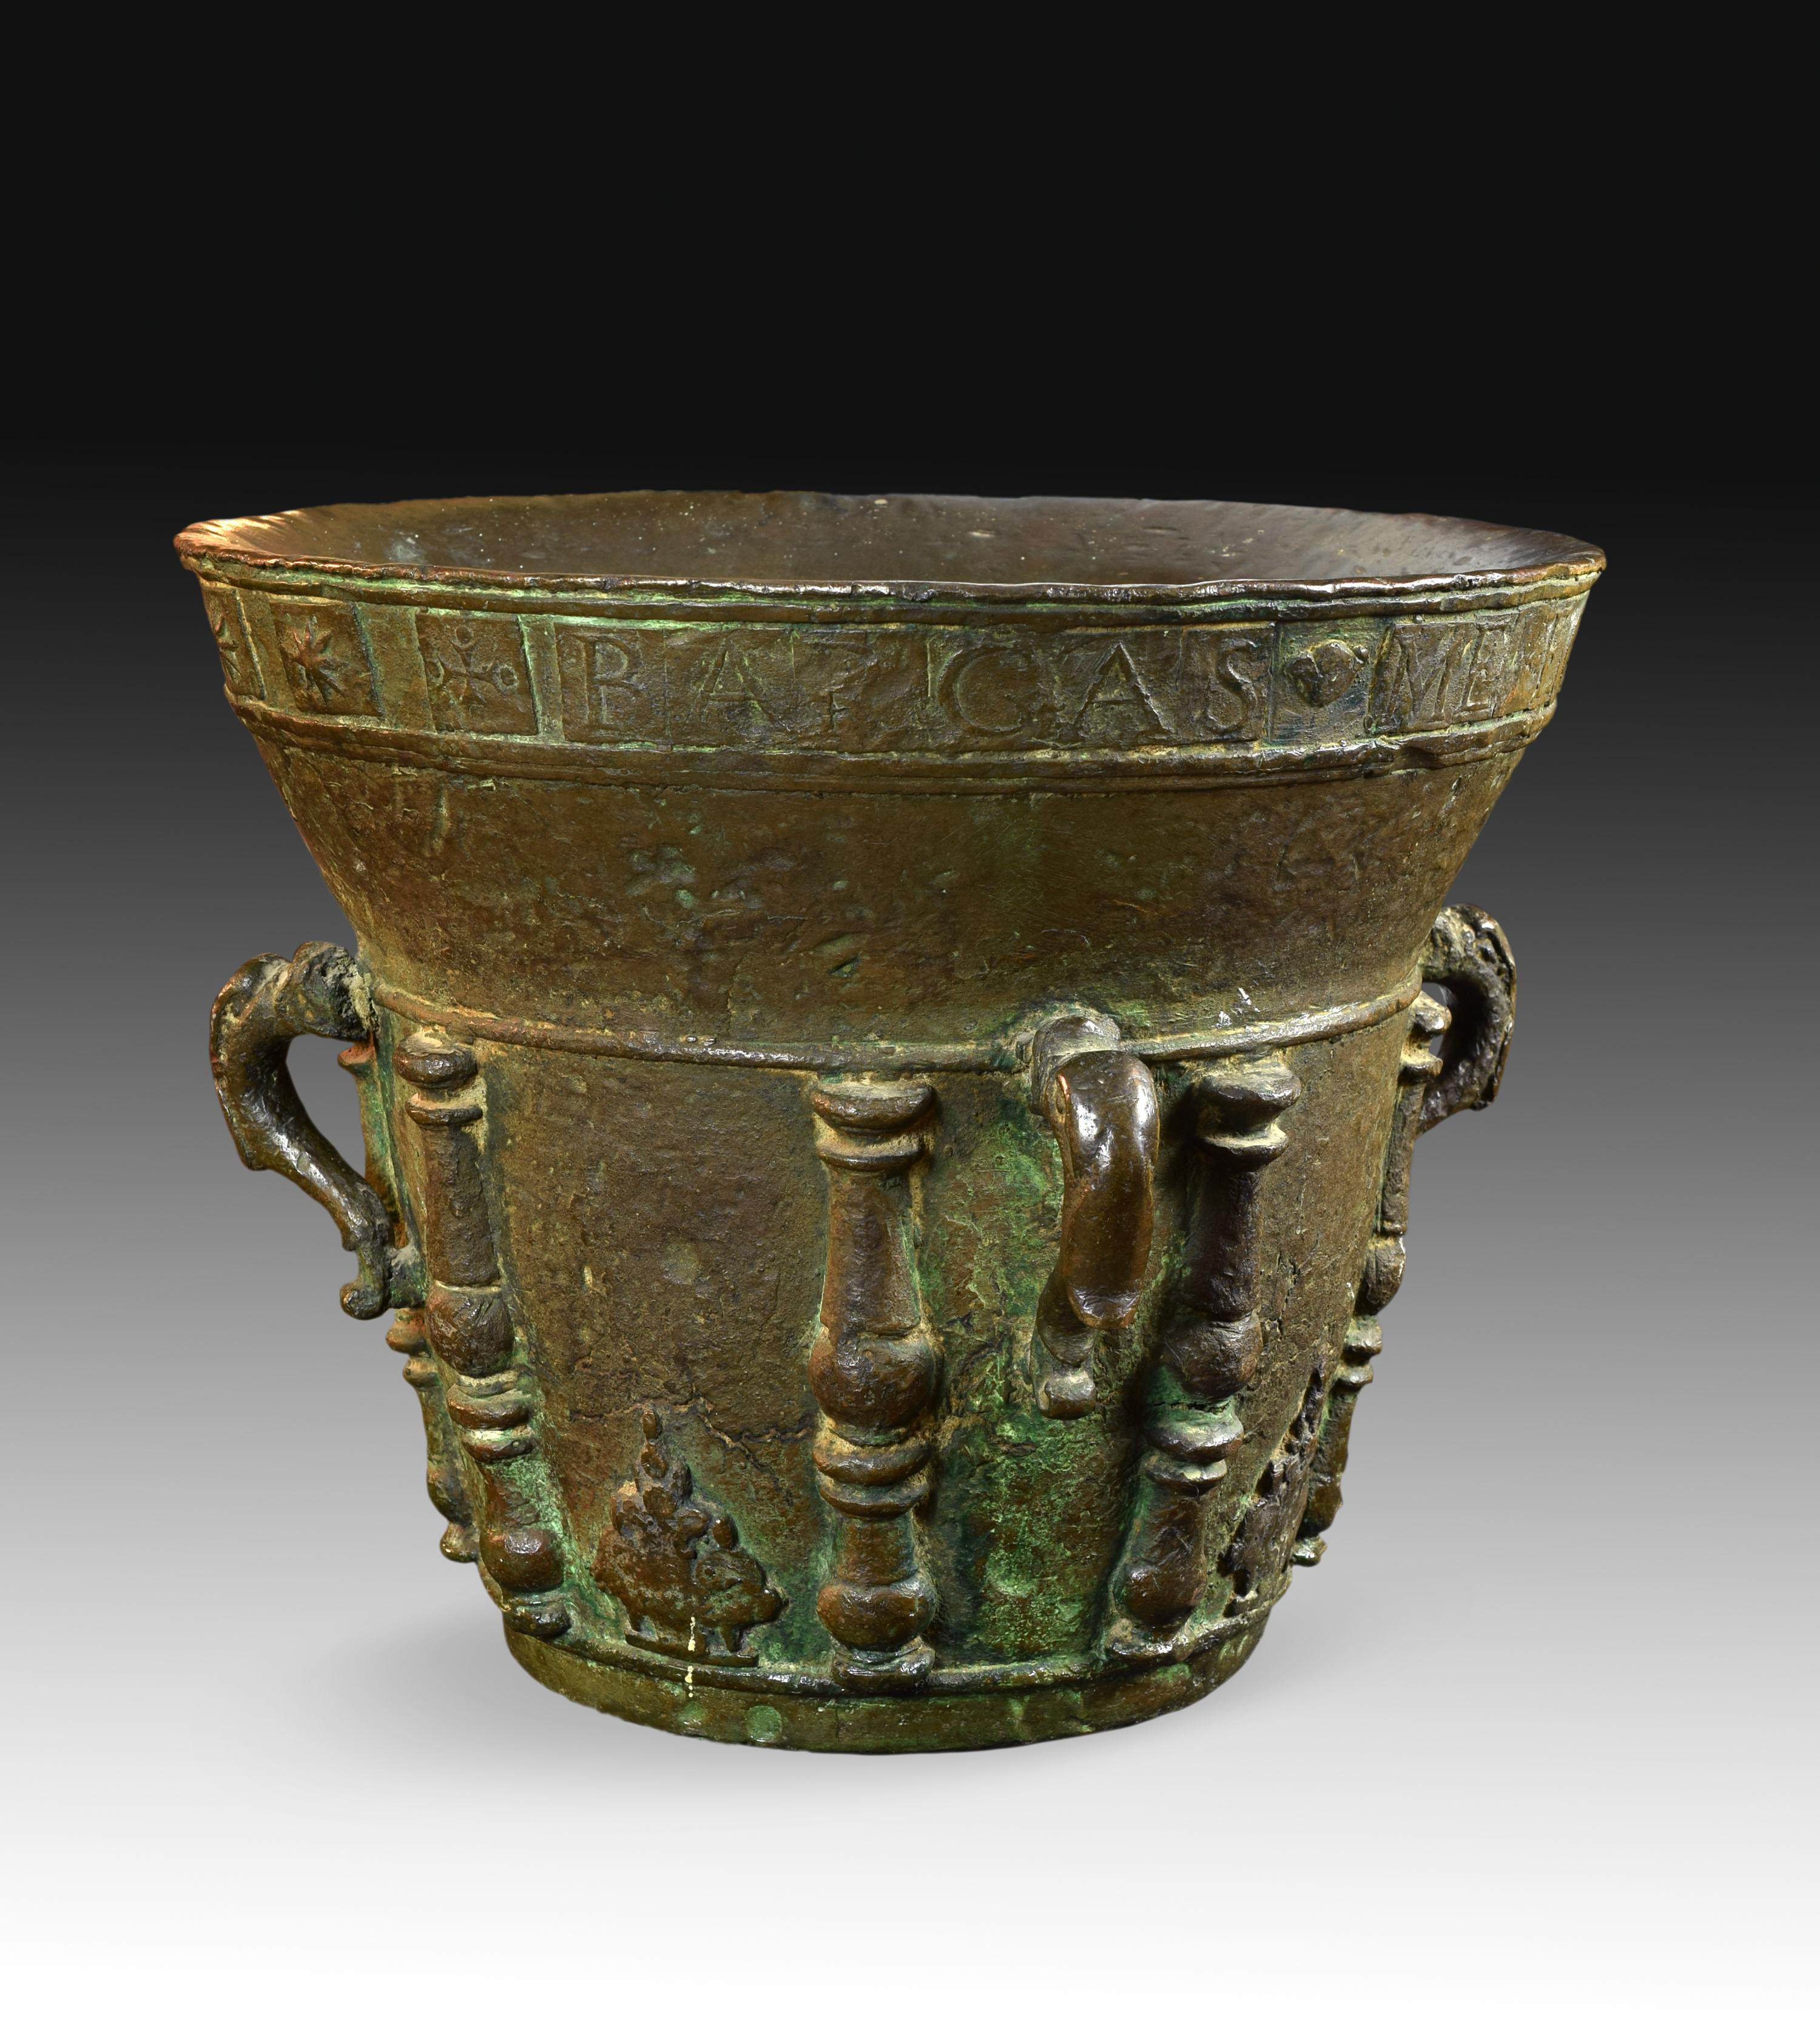 Bronze Pharmacy Mortar, Signed and Dated 'Bargas, 1711' 1